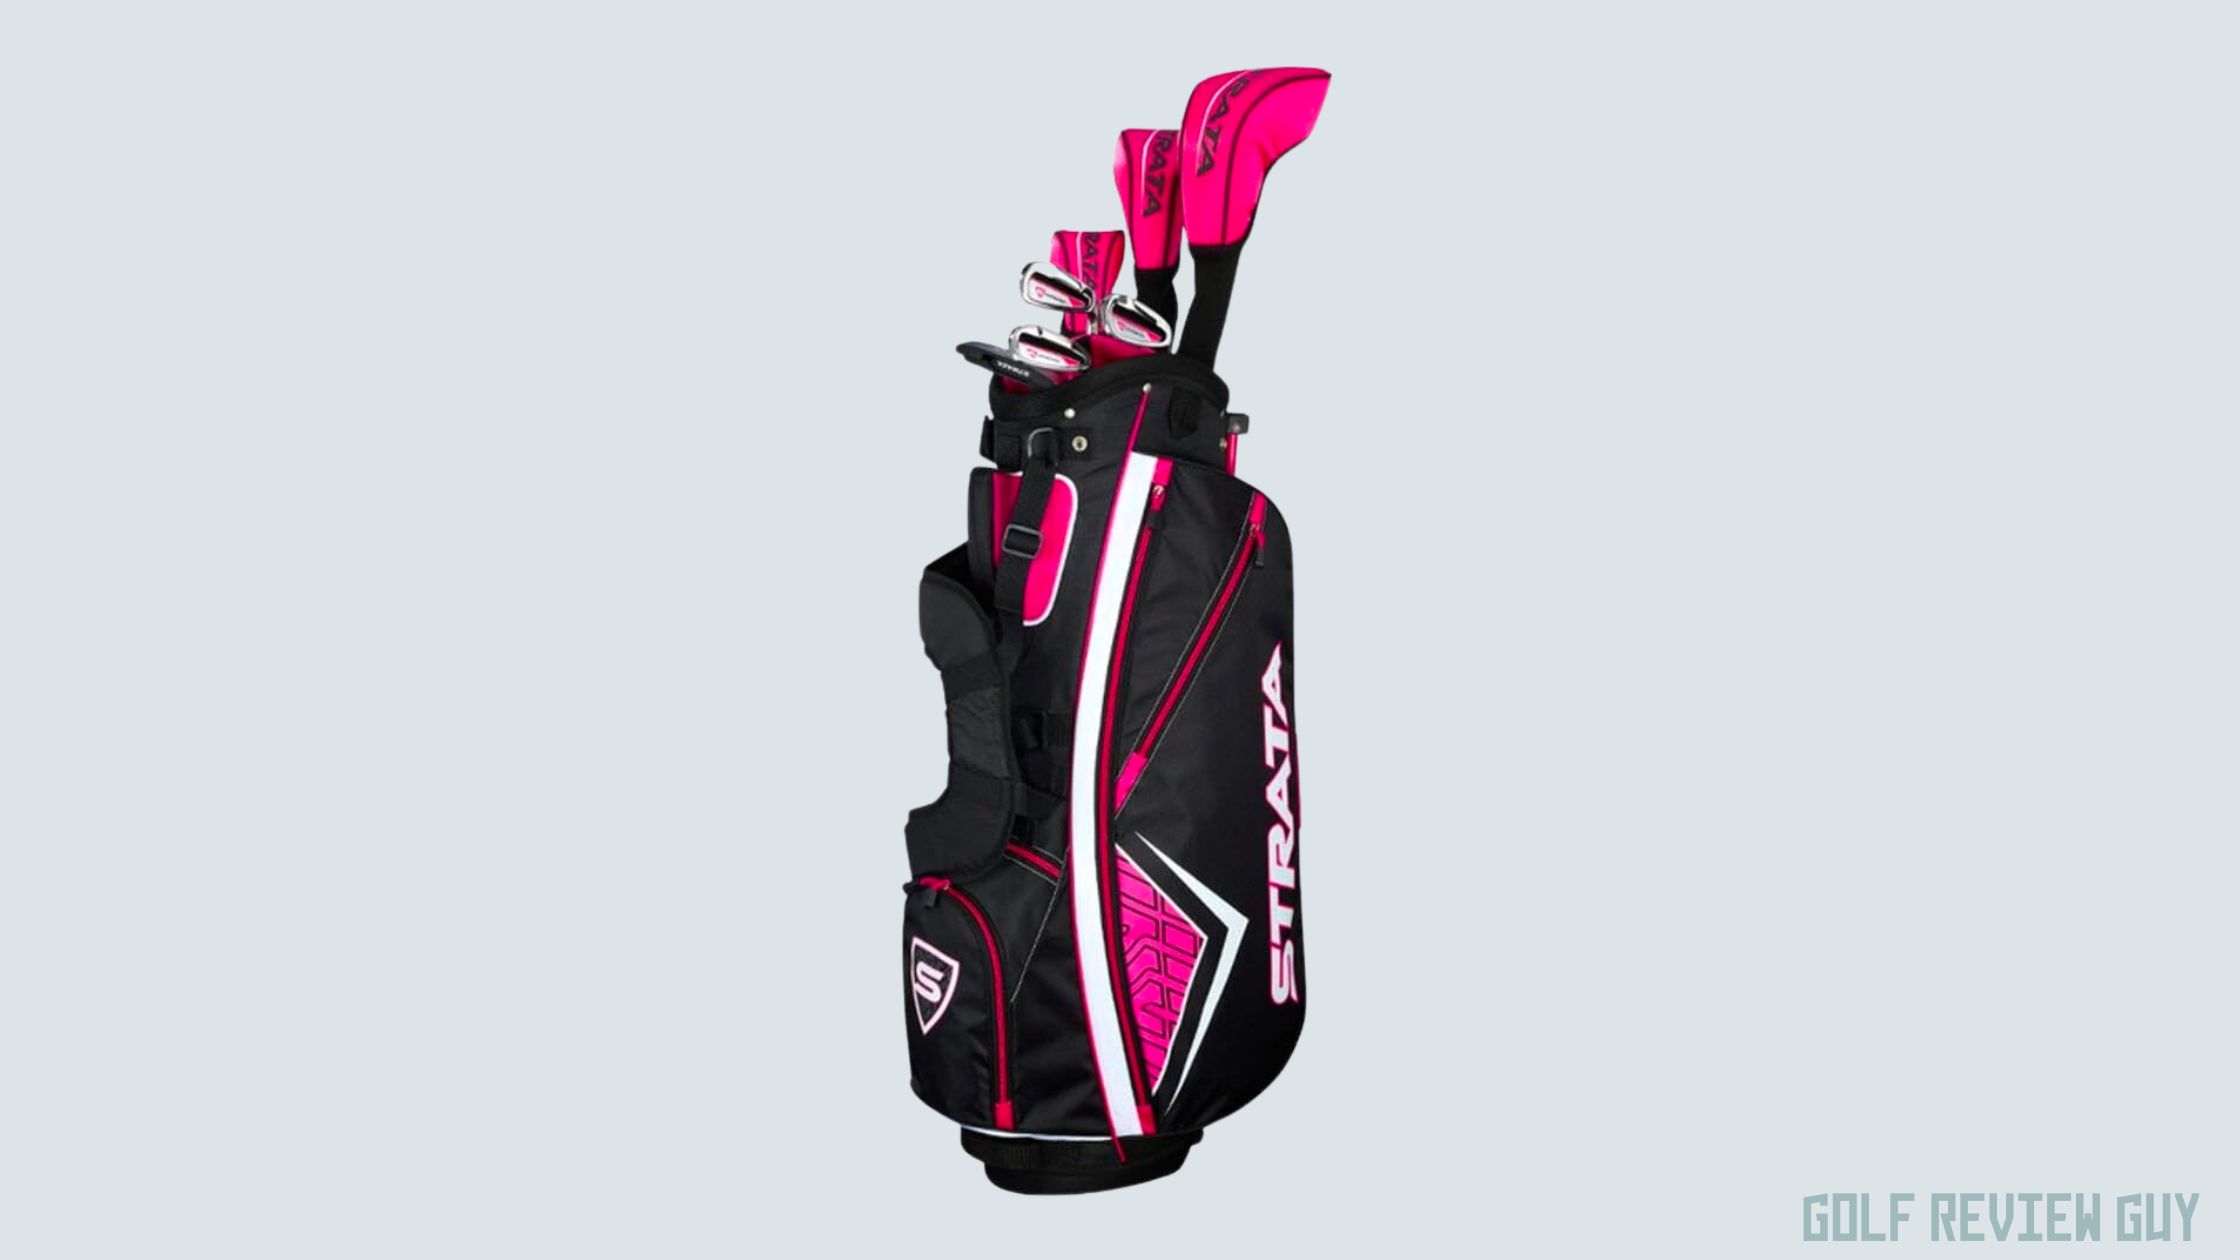 Strata Women’s Complete Golf Set Review - Golf Review Guy